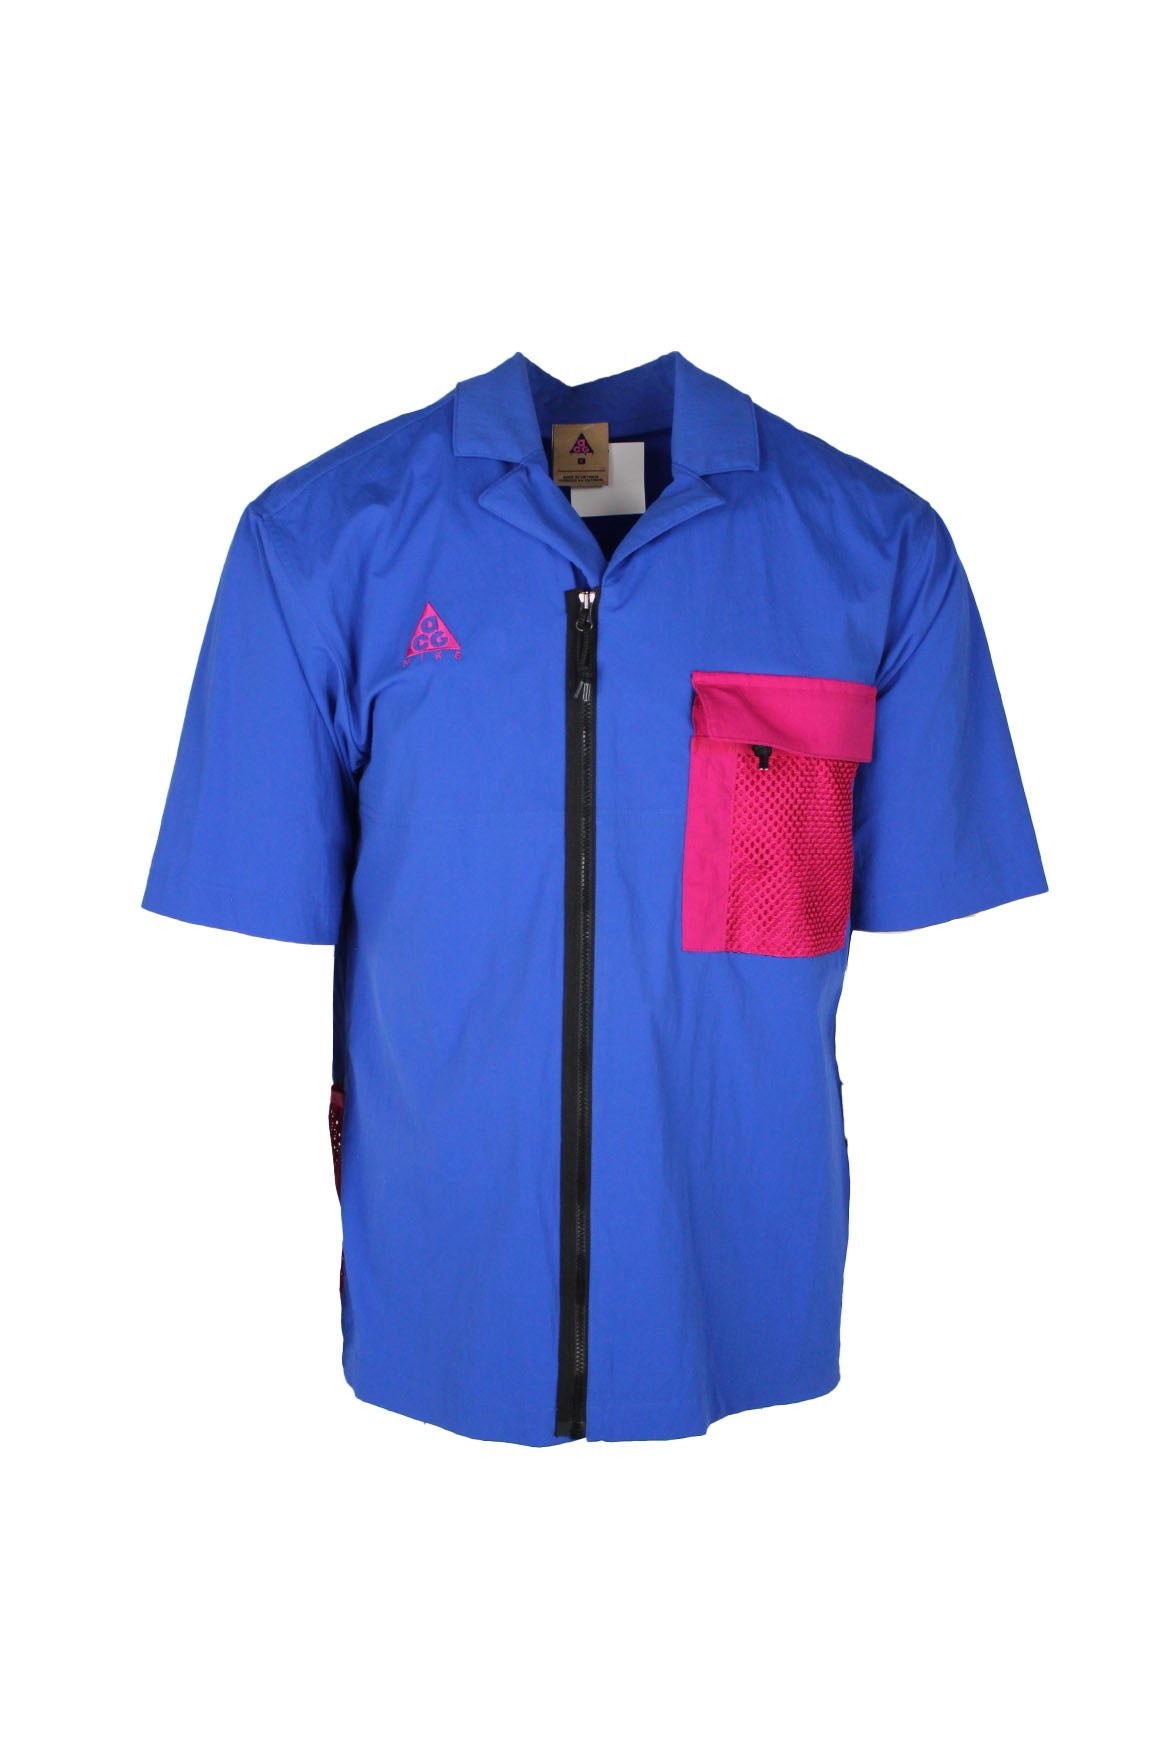 front view of nike acg royal blue/neon pink short sleeve zip up nylon shirt. features ‘acg nike’ logo embroidered at right breast, multi zip slot flap mesh pocket at left breast, and breathable mesh pockets at back above hem.